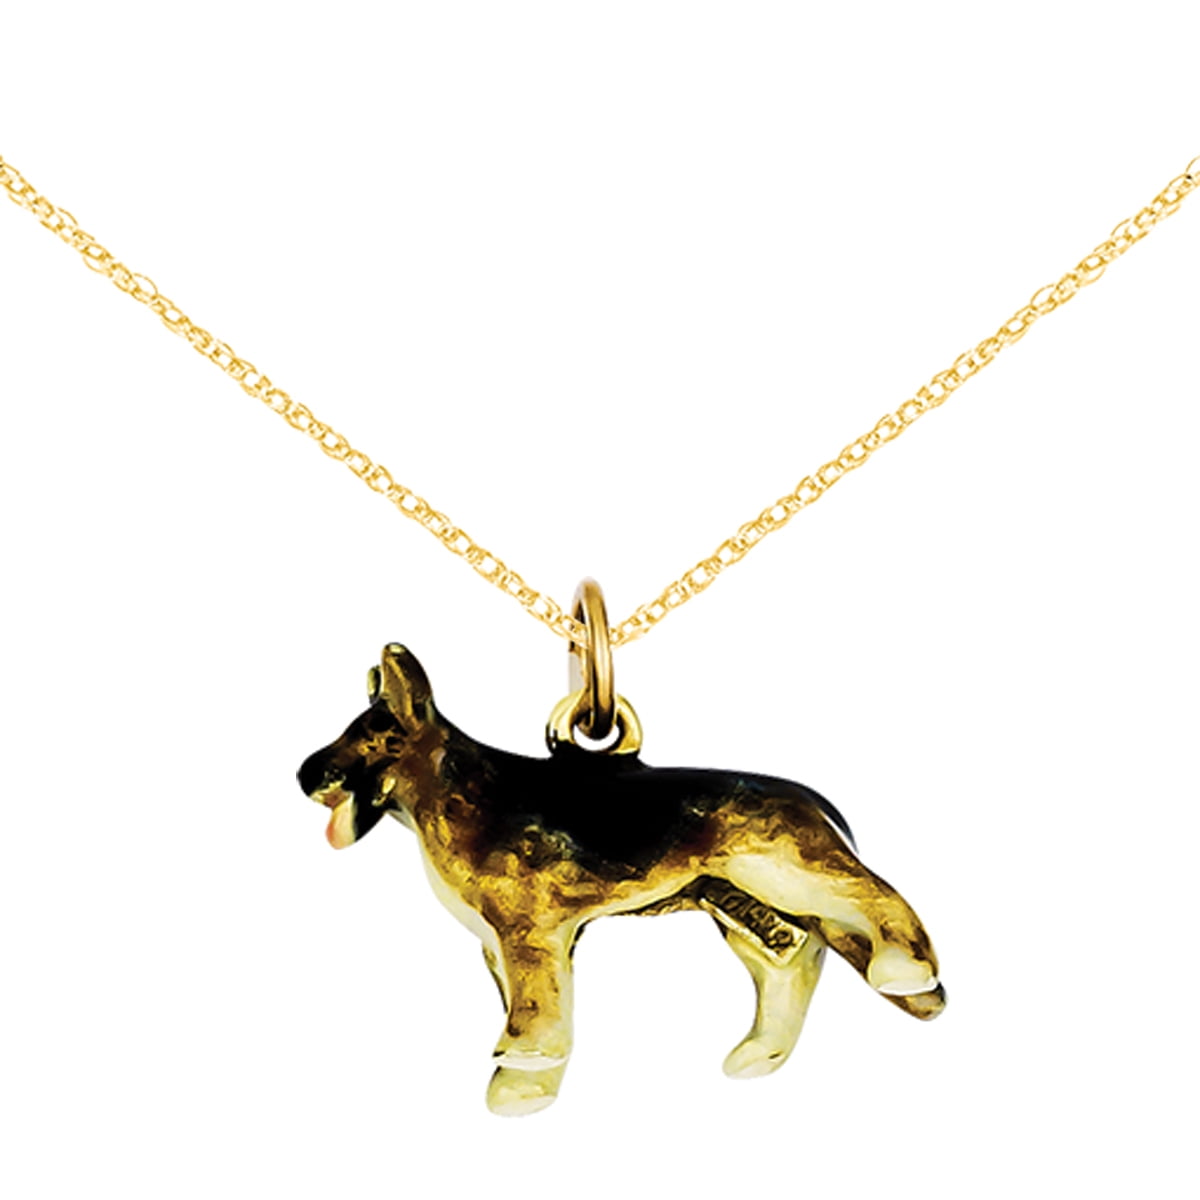 Buy Gold German Shepherd Dog Necklace Pendant Charm Gifts Shephard Animal  Jewelry Pet 10k Plated Shepard Online in India - Etsy